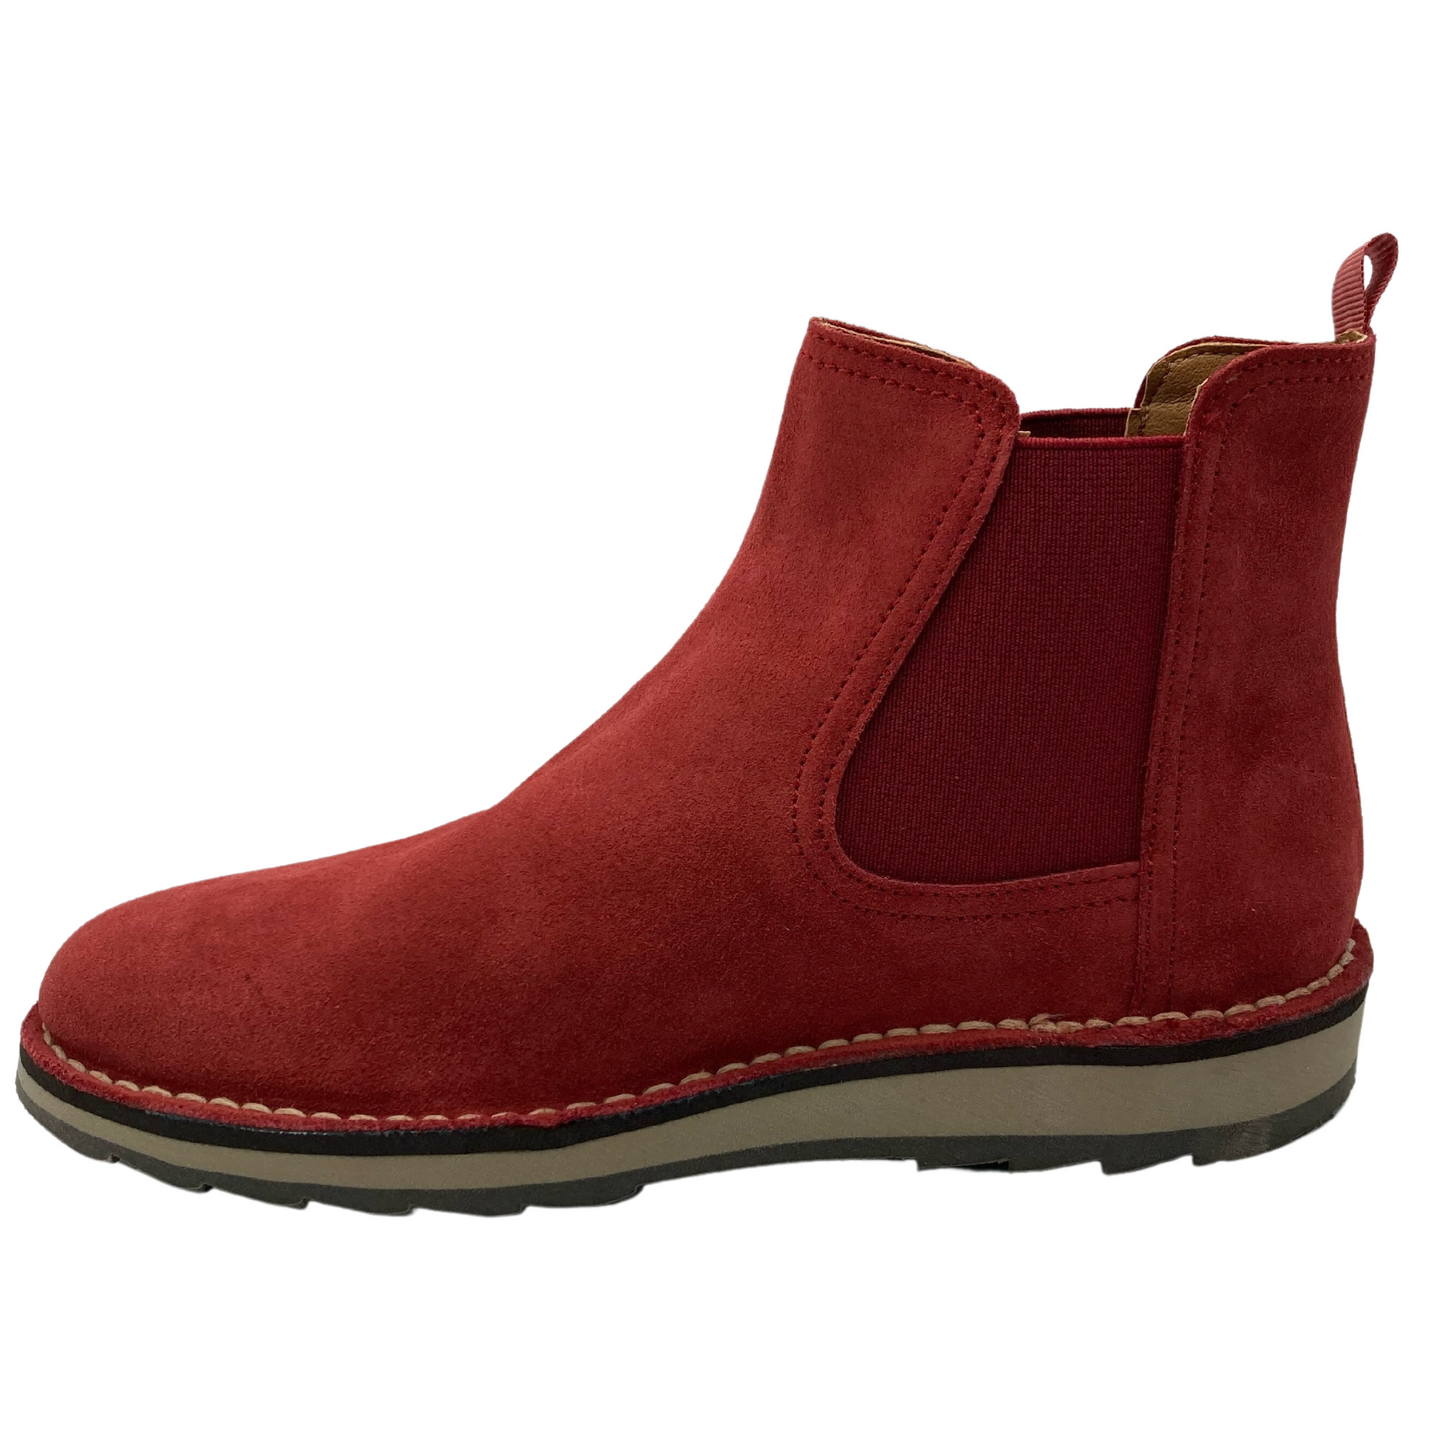 Left facing profile view of short red leather boot with cream coloured stitching around shoe